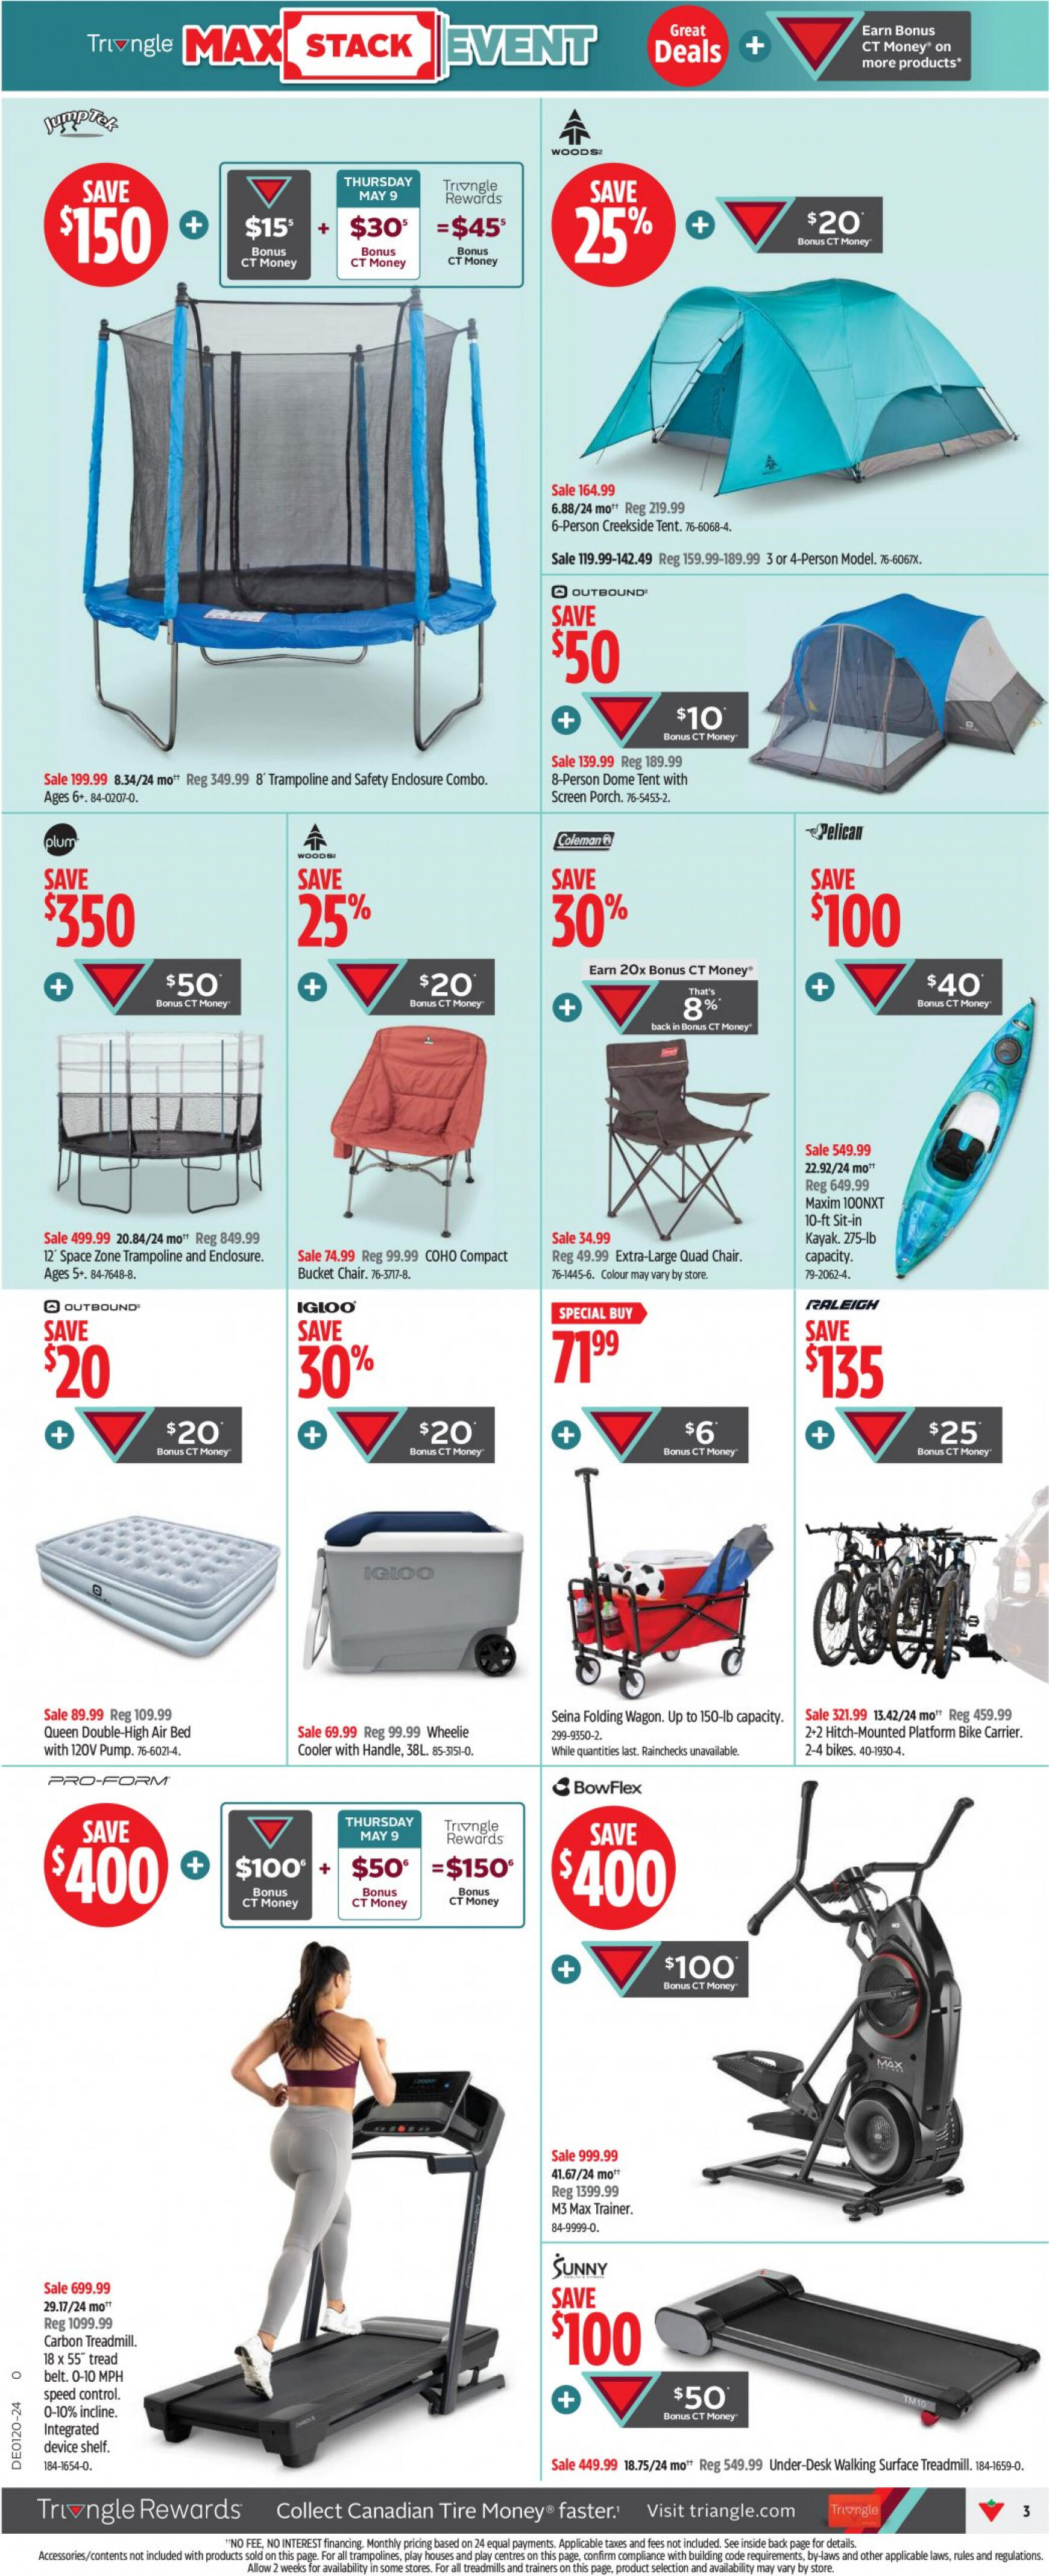 canadian-tire - Canadian Tire flyer current 09.05. - 15.05. - page: 3